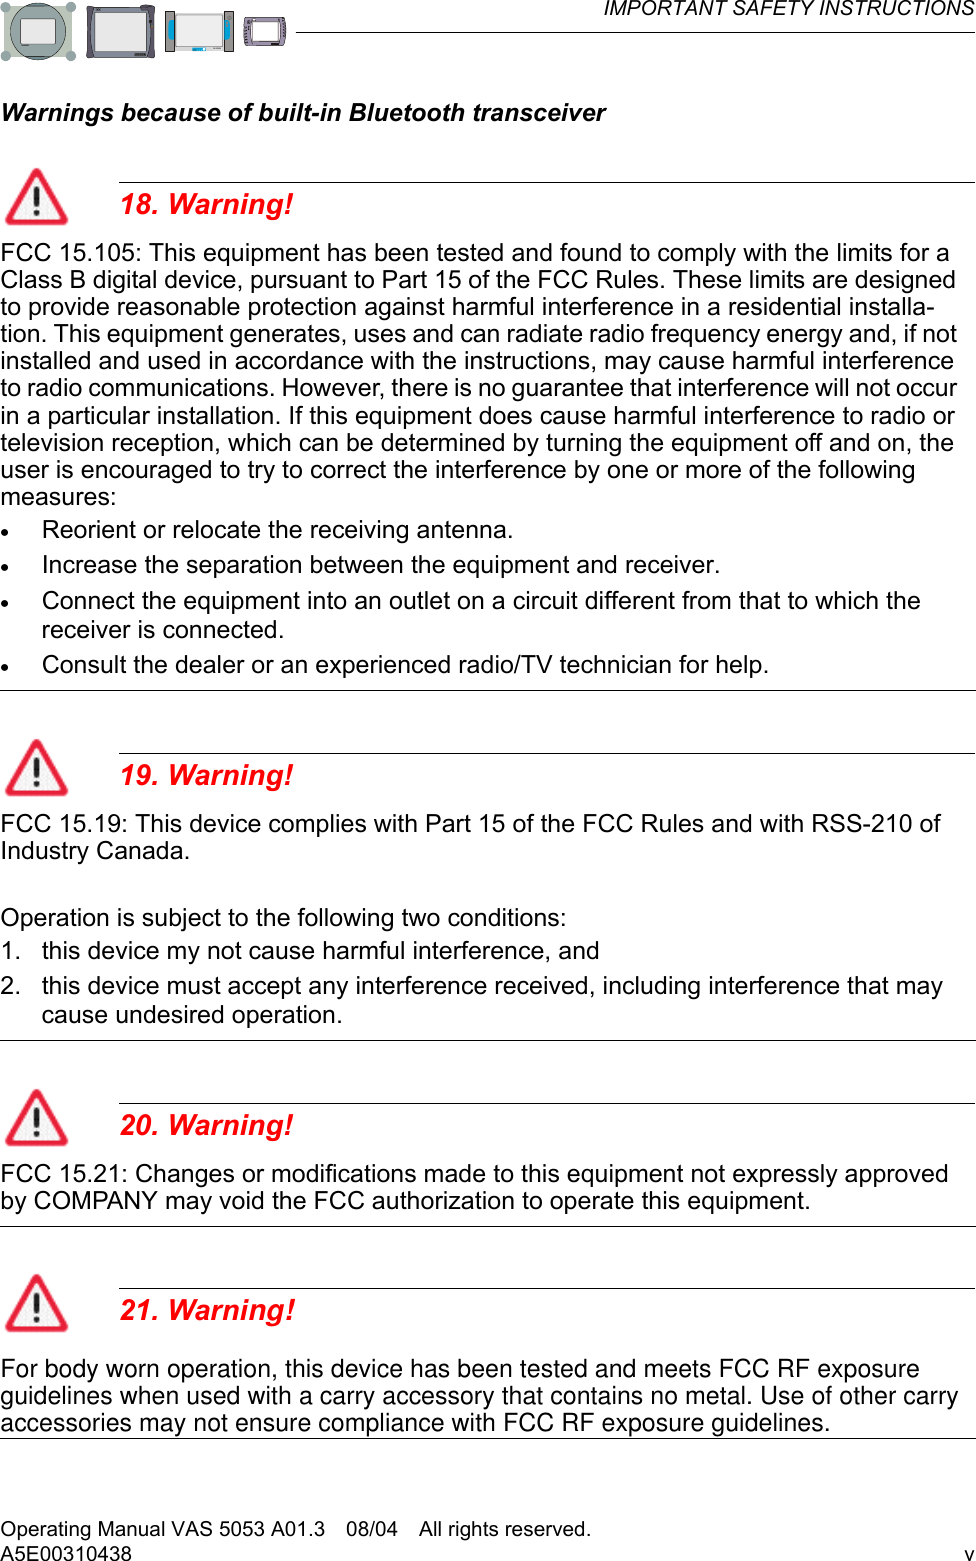 IMPORTANT SAFETY INSTRUCTIONSOperating Manual VAS 5053 A01.3 08/04 All rights reserved.vA5E00310438VAS 5053VAS 5051BVAS 5051VAS 5052Warnings because of built-in Bluetooth transceiver18. Warning!FCC 15.105: This equipment has been tested and found to comply with the limits for a Class B digital device, pursuant to Part 15 of the FCC Rules. These limits are designed to provide reasonable protection against harmful interference in a residential installa-tion. This equipment generates, uses and can radiate radio frequency energy and, if not installed and used in accordance with the instructions, may cause harmful interference to radio communications. However, there is no guarantee that interference will not occur in a particular installation. If this equipment does cause harmful interference to radio or television reception, which can be determined by turning the equipment off and on, the user is encouraged to try to correct the interference by one or more of the following measures:•Reorient or relocate the receiving antenna.•Increase the separation between the equipment and receiver.•Connect the equipment into an outlet on a circuit different from that to which the receiver is connected.•Consult the dealer or an experienced radio/TV technician for help.19. Warning!FCC 15.19: This device complies with Part 15 of the FCC Rules and with RSS-210 of Industry Canada.Operation is subject to the following two conditions:1. this device my not cause harmful interference, and 2. this device must accept any interference received, including interference that may cause undesired operation.20. Warning!FCC 15.21: Changes or modifications made to this equipment not expressly approved by COMPANY may void the FCC authorization to operate this equipment.21. Warning! For body worn operation, this device has been tested and meets FCC RF exposure guidelines when used with a carry accessory that contains no metal. Use of other carryaccessories may not ensure compliance with FCC RF exposure guidelines.